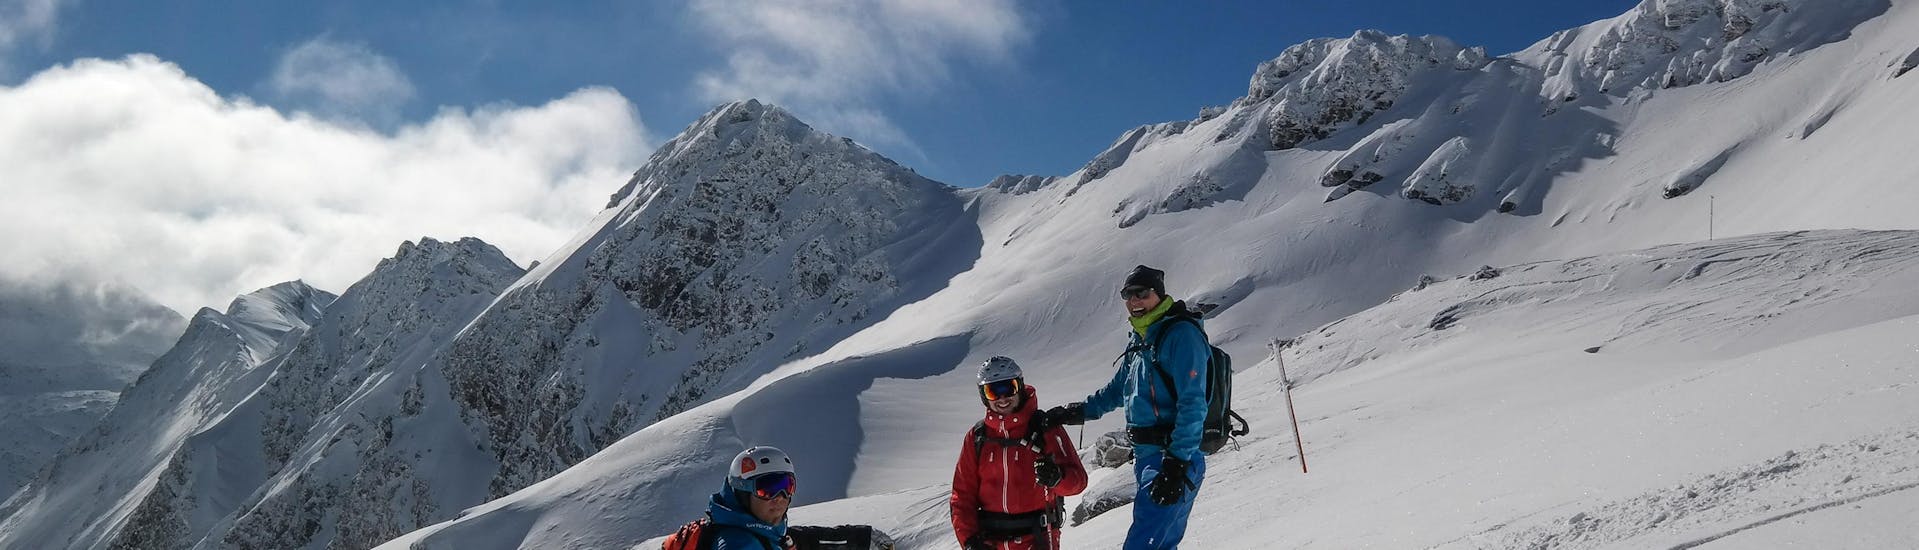 Private Ski Touring Guide for All Levels from Ski School Snowsports Gastein.